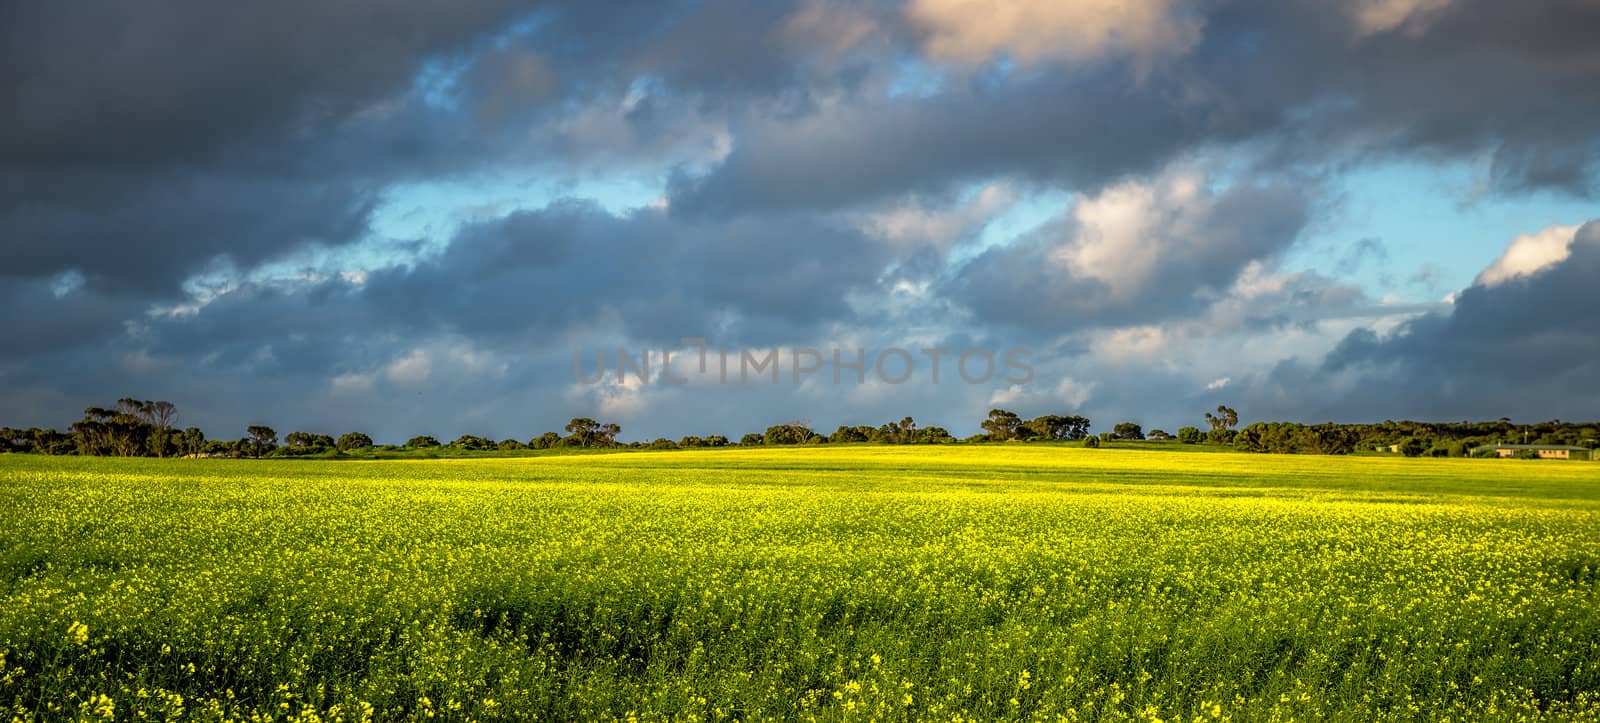 A break in the clouds let beautiful golden light enhance the yellow of the canola fields.